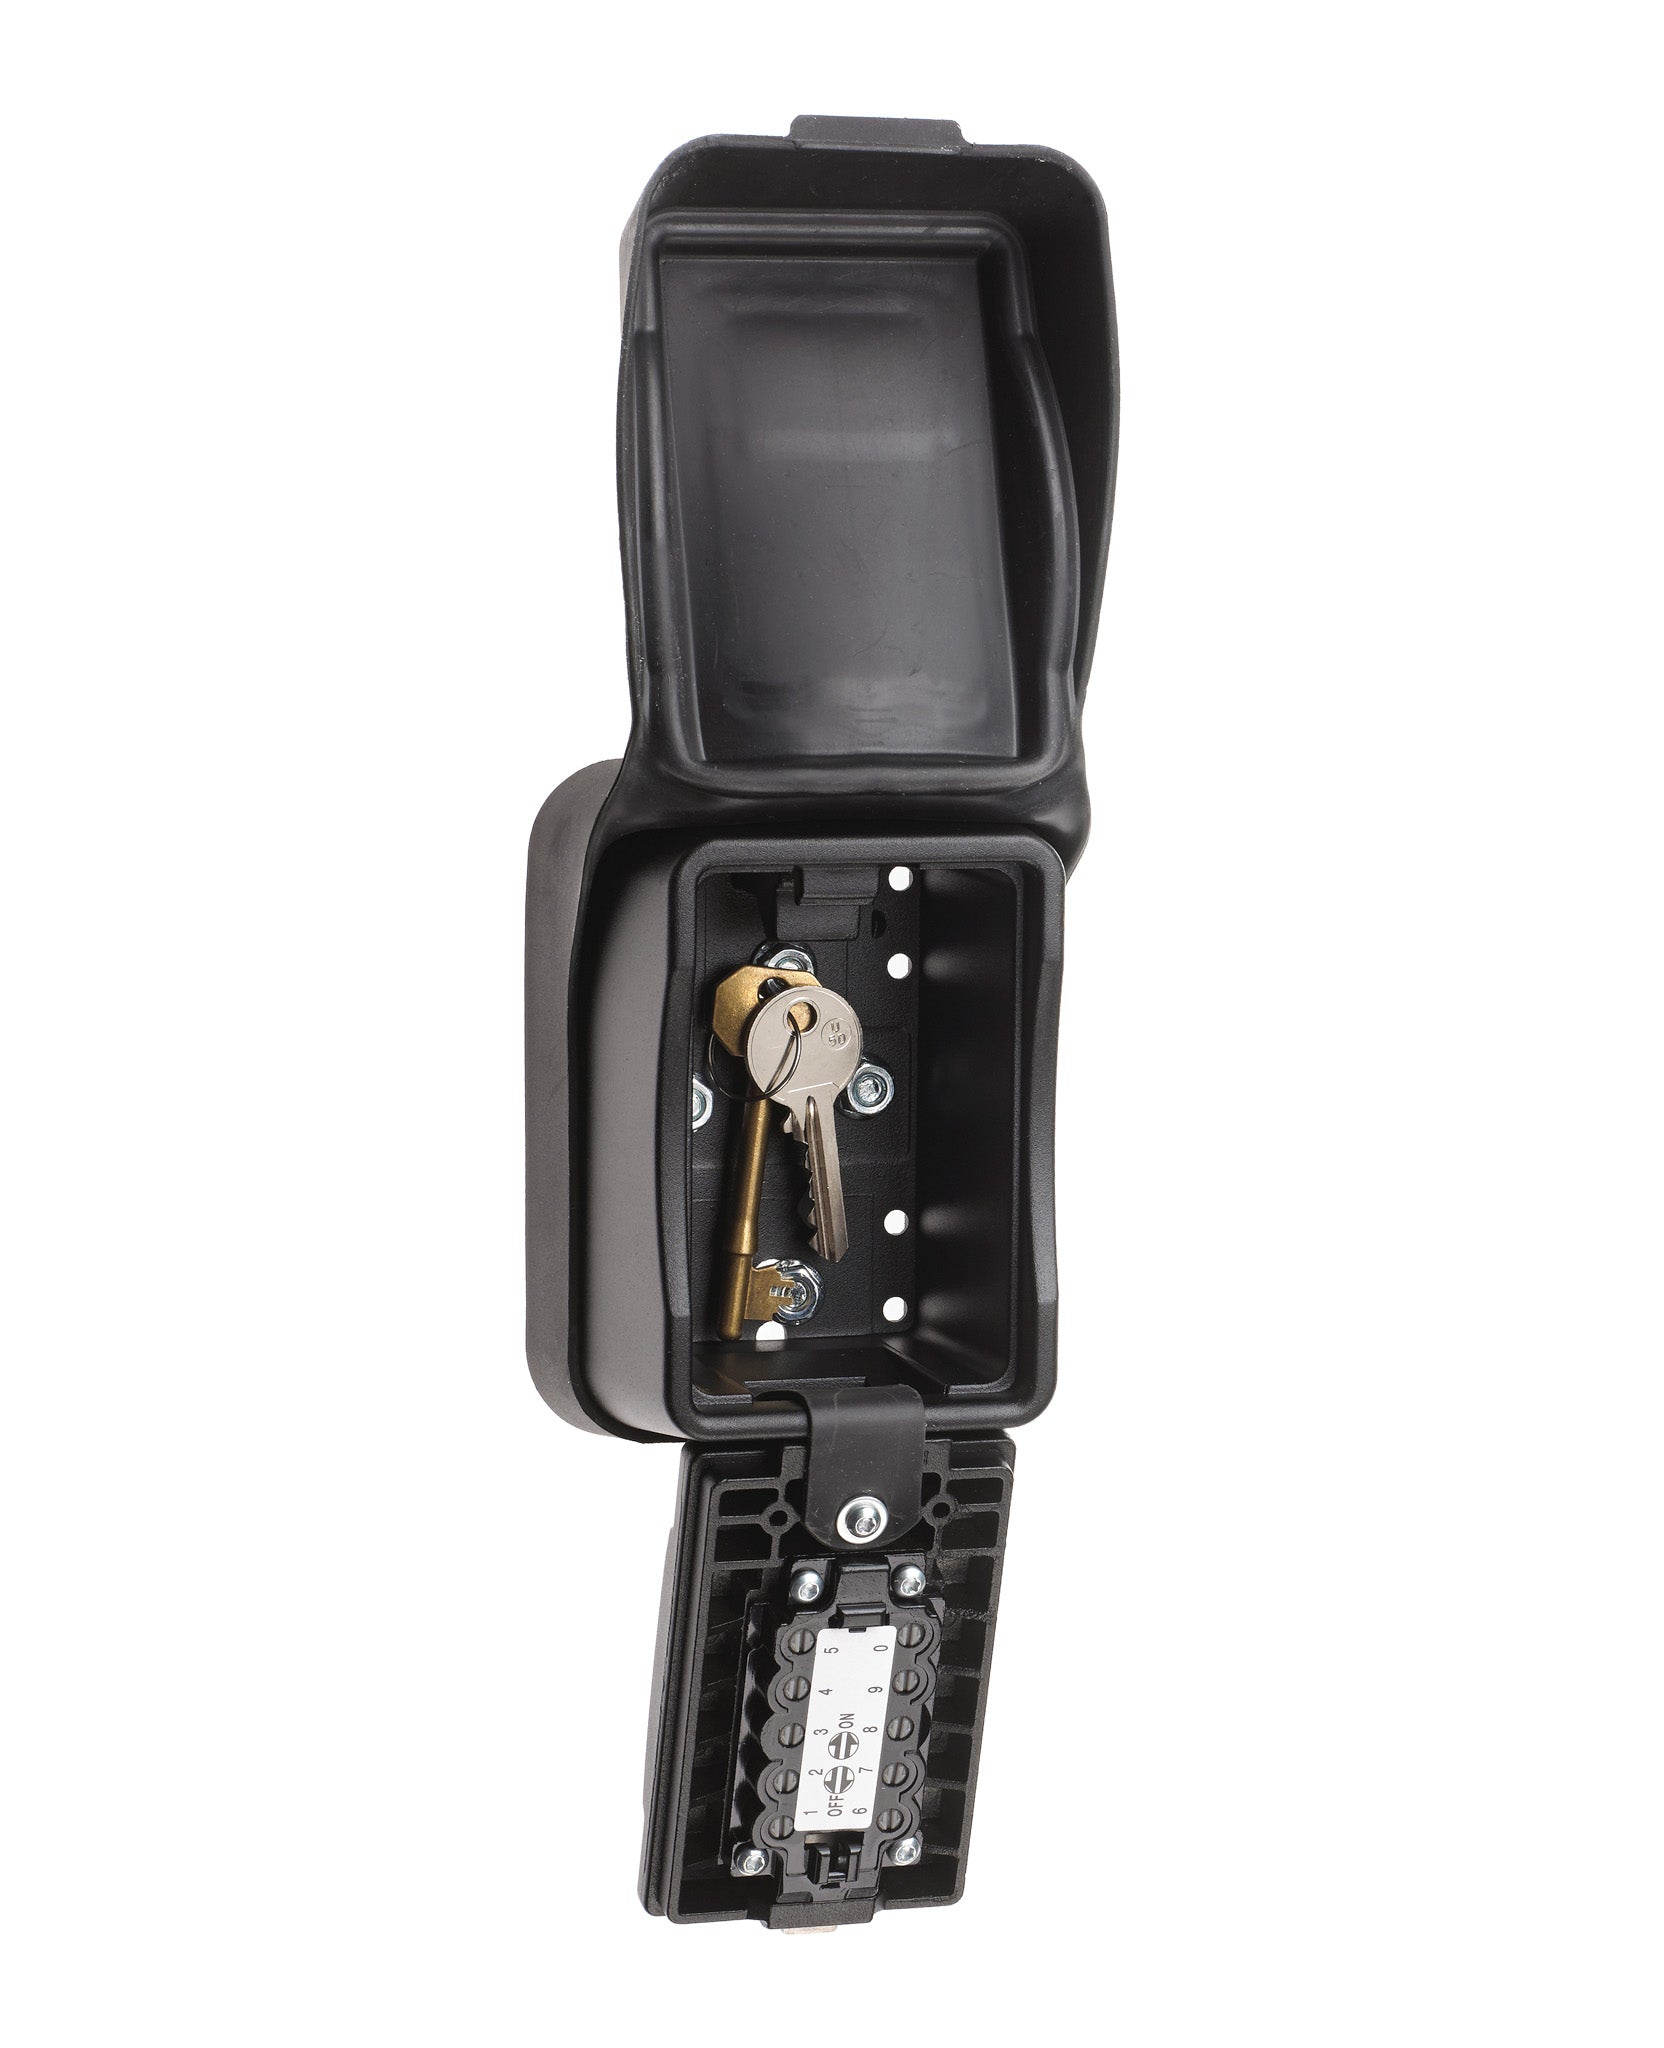 Open Supra S7 big box key safe with spacious vault holding bunch of keys and open weather cover